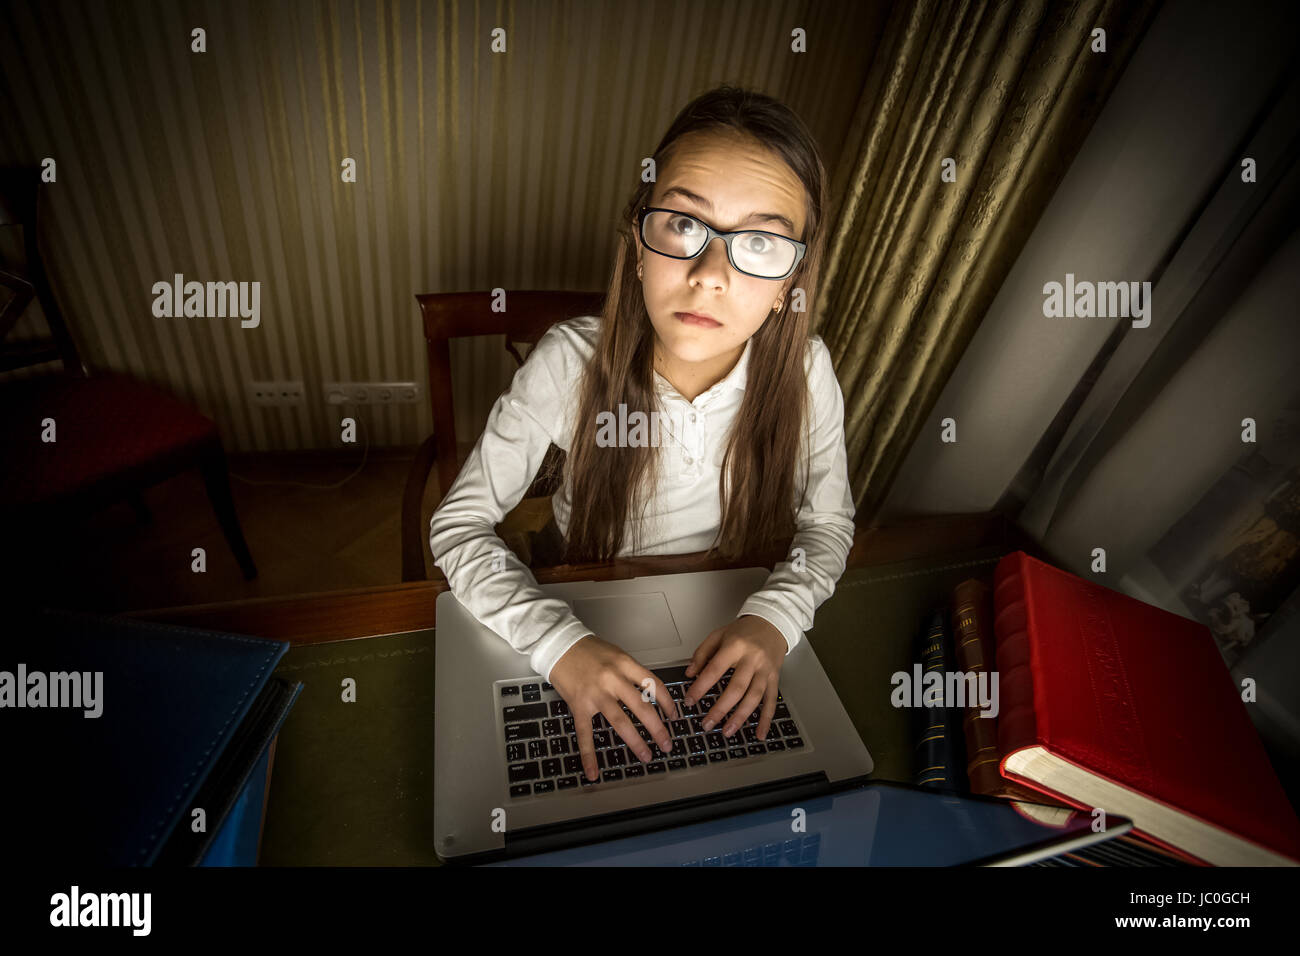 Funny portrait of computer geek girl sitting at laptop at night Stock Photo